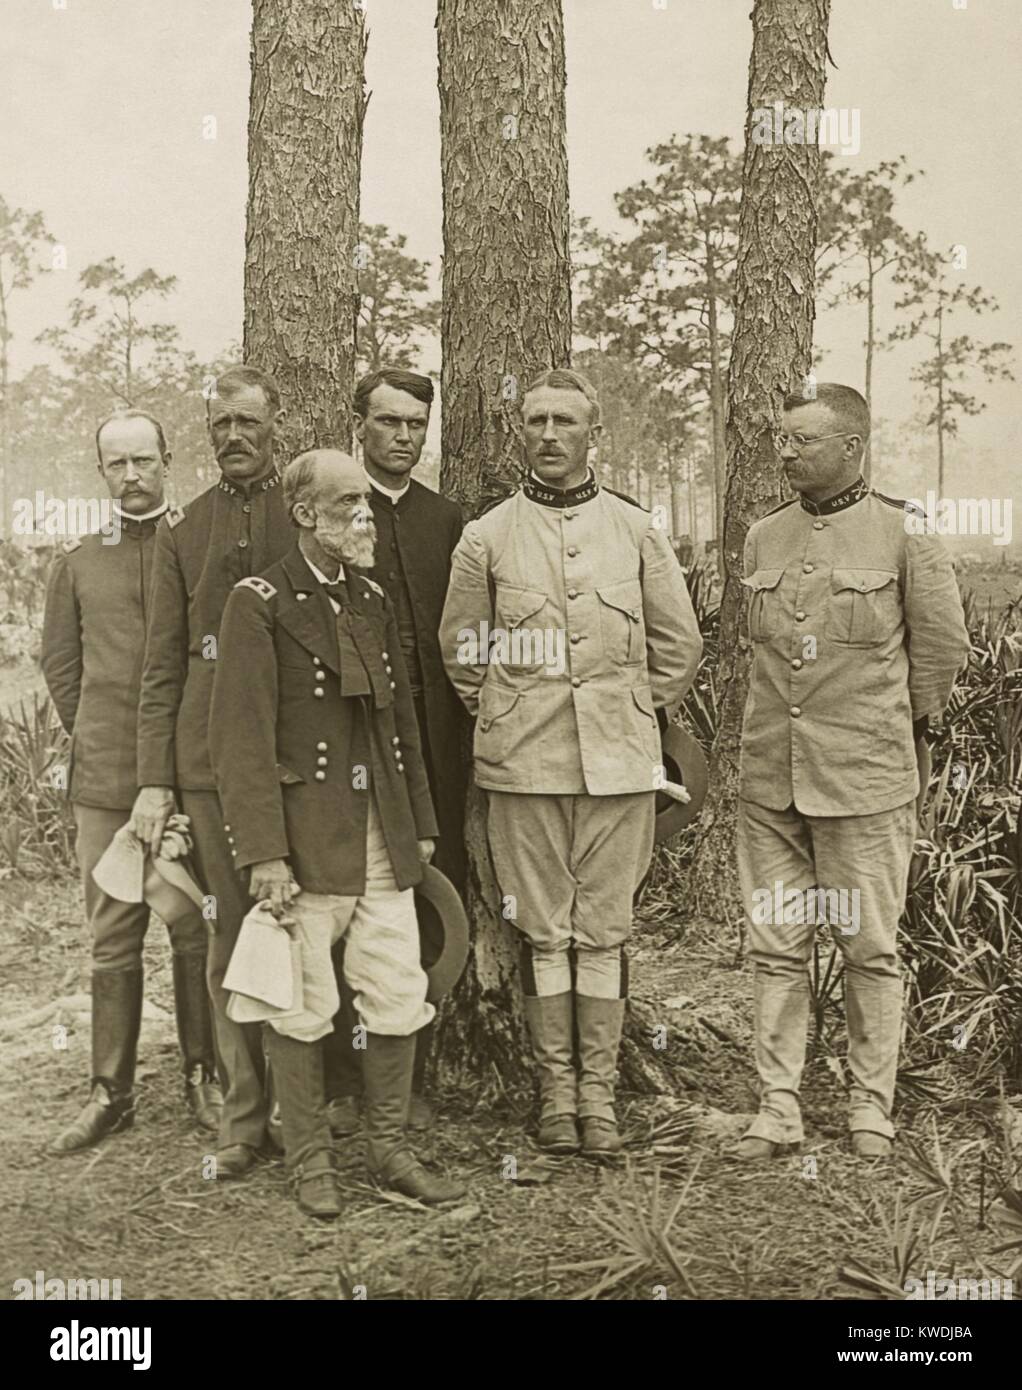 Staff of the 1st US Volunteer Regiment in Tampa Florida with Confederate General Joe Wheeler. Photo was taken in May 1898 before their embarkation for Cuba. L-R: Major Alexander Oswald Brodie; Taylor MacDonald, General Joe Wheeler (with beard); Journalist Richard Harding Davis; Col. Leonard Wood; Lt. Col. Theodore Roosevelt (BSLOC 2017 10 24) Stock Photo